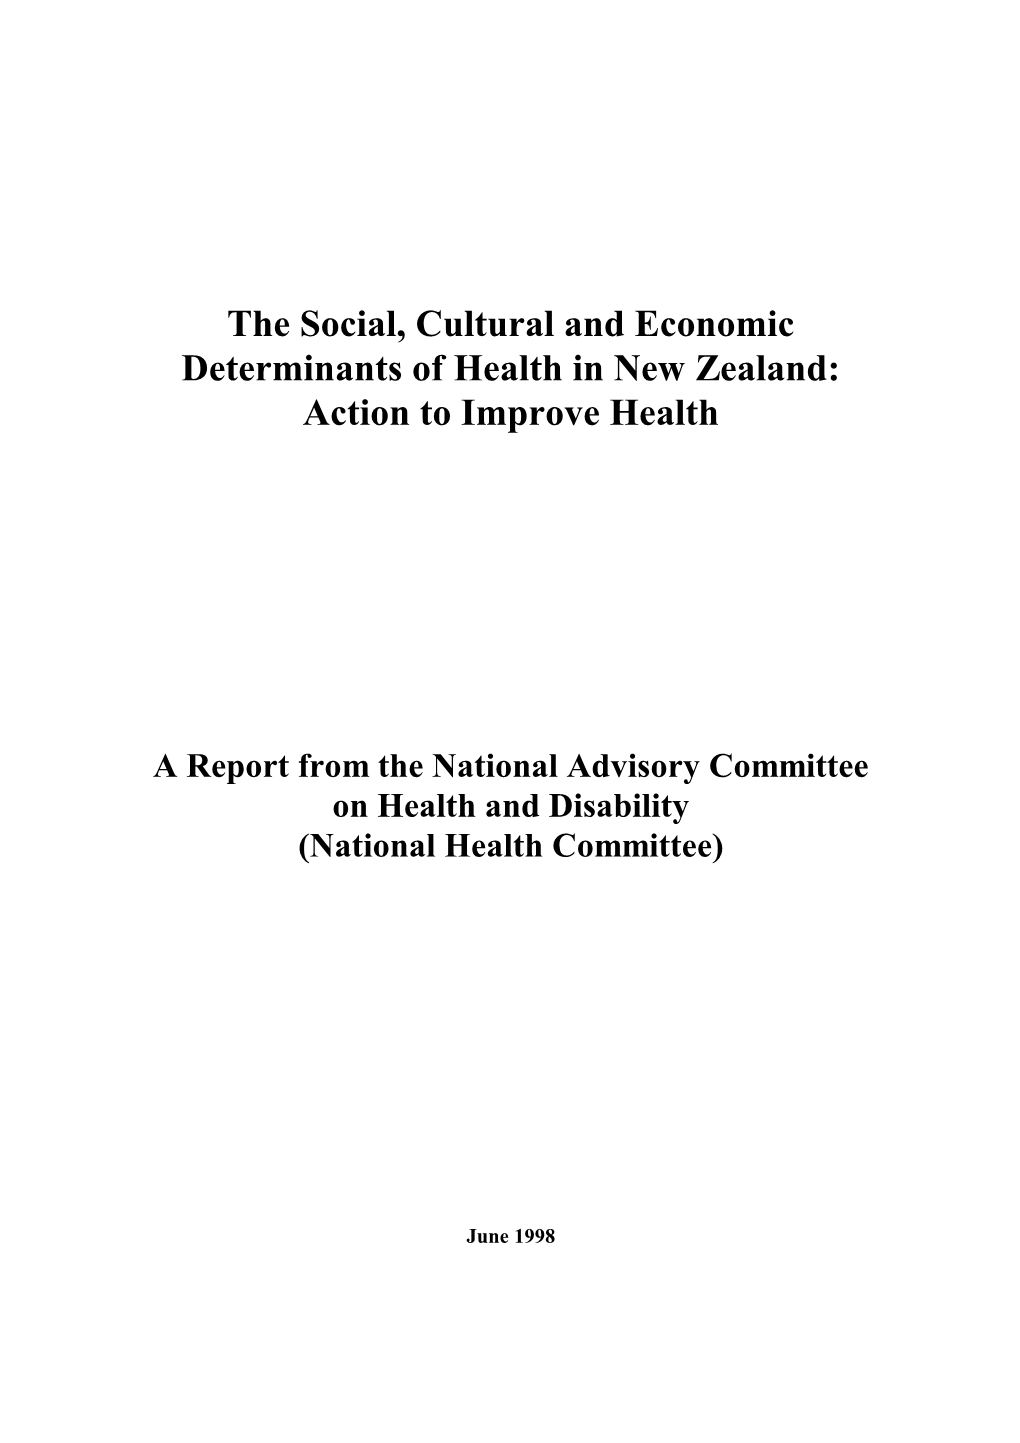 The Social, Cultural and Economic Determinants of Health in New Zealand: Action to Improve Health